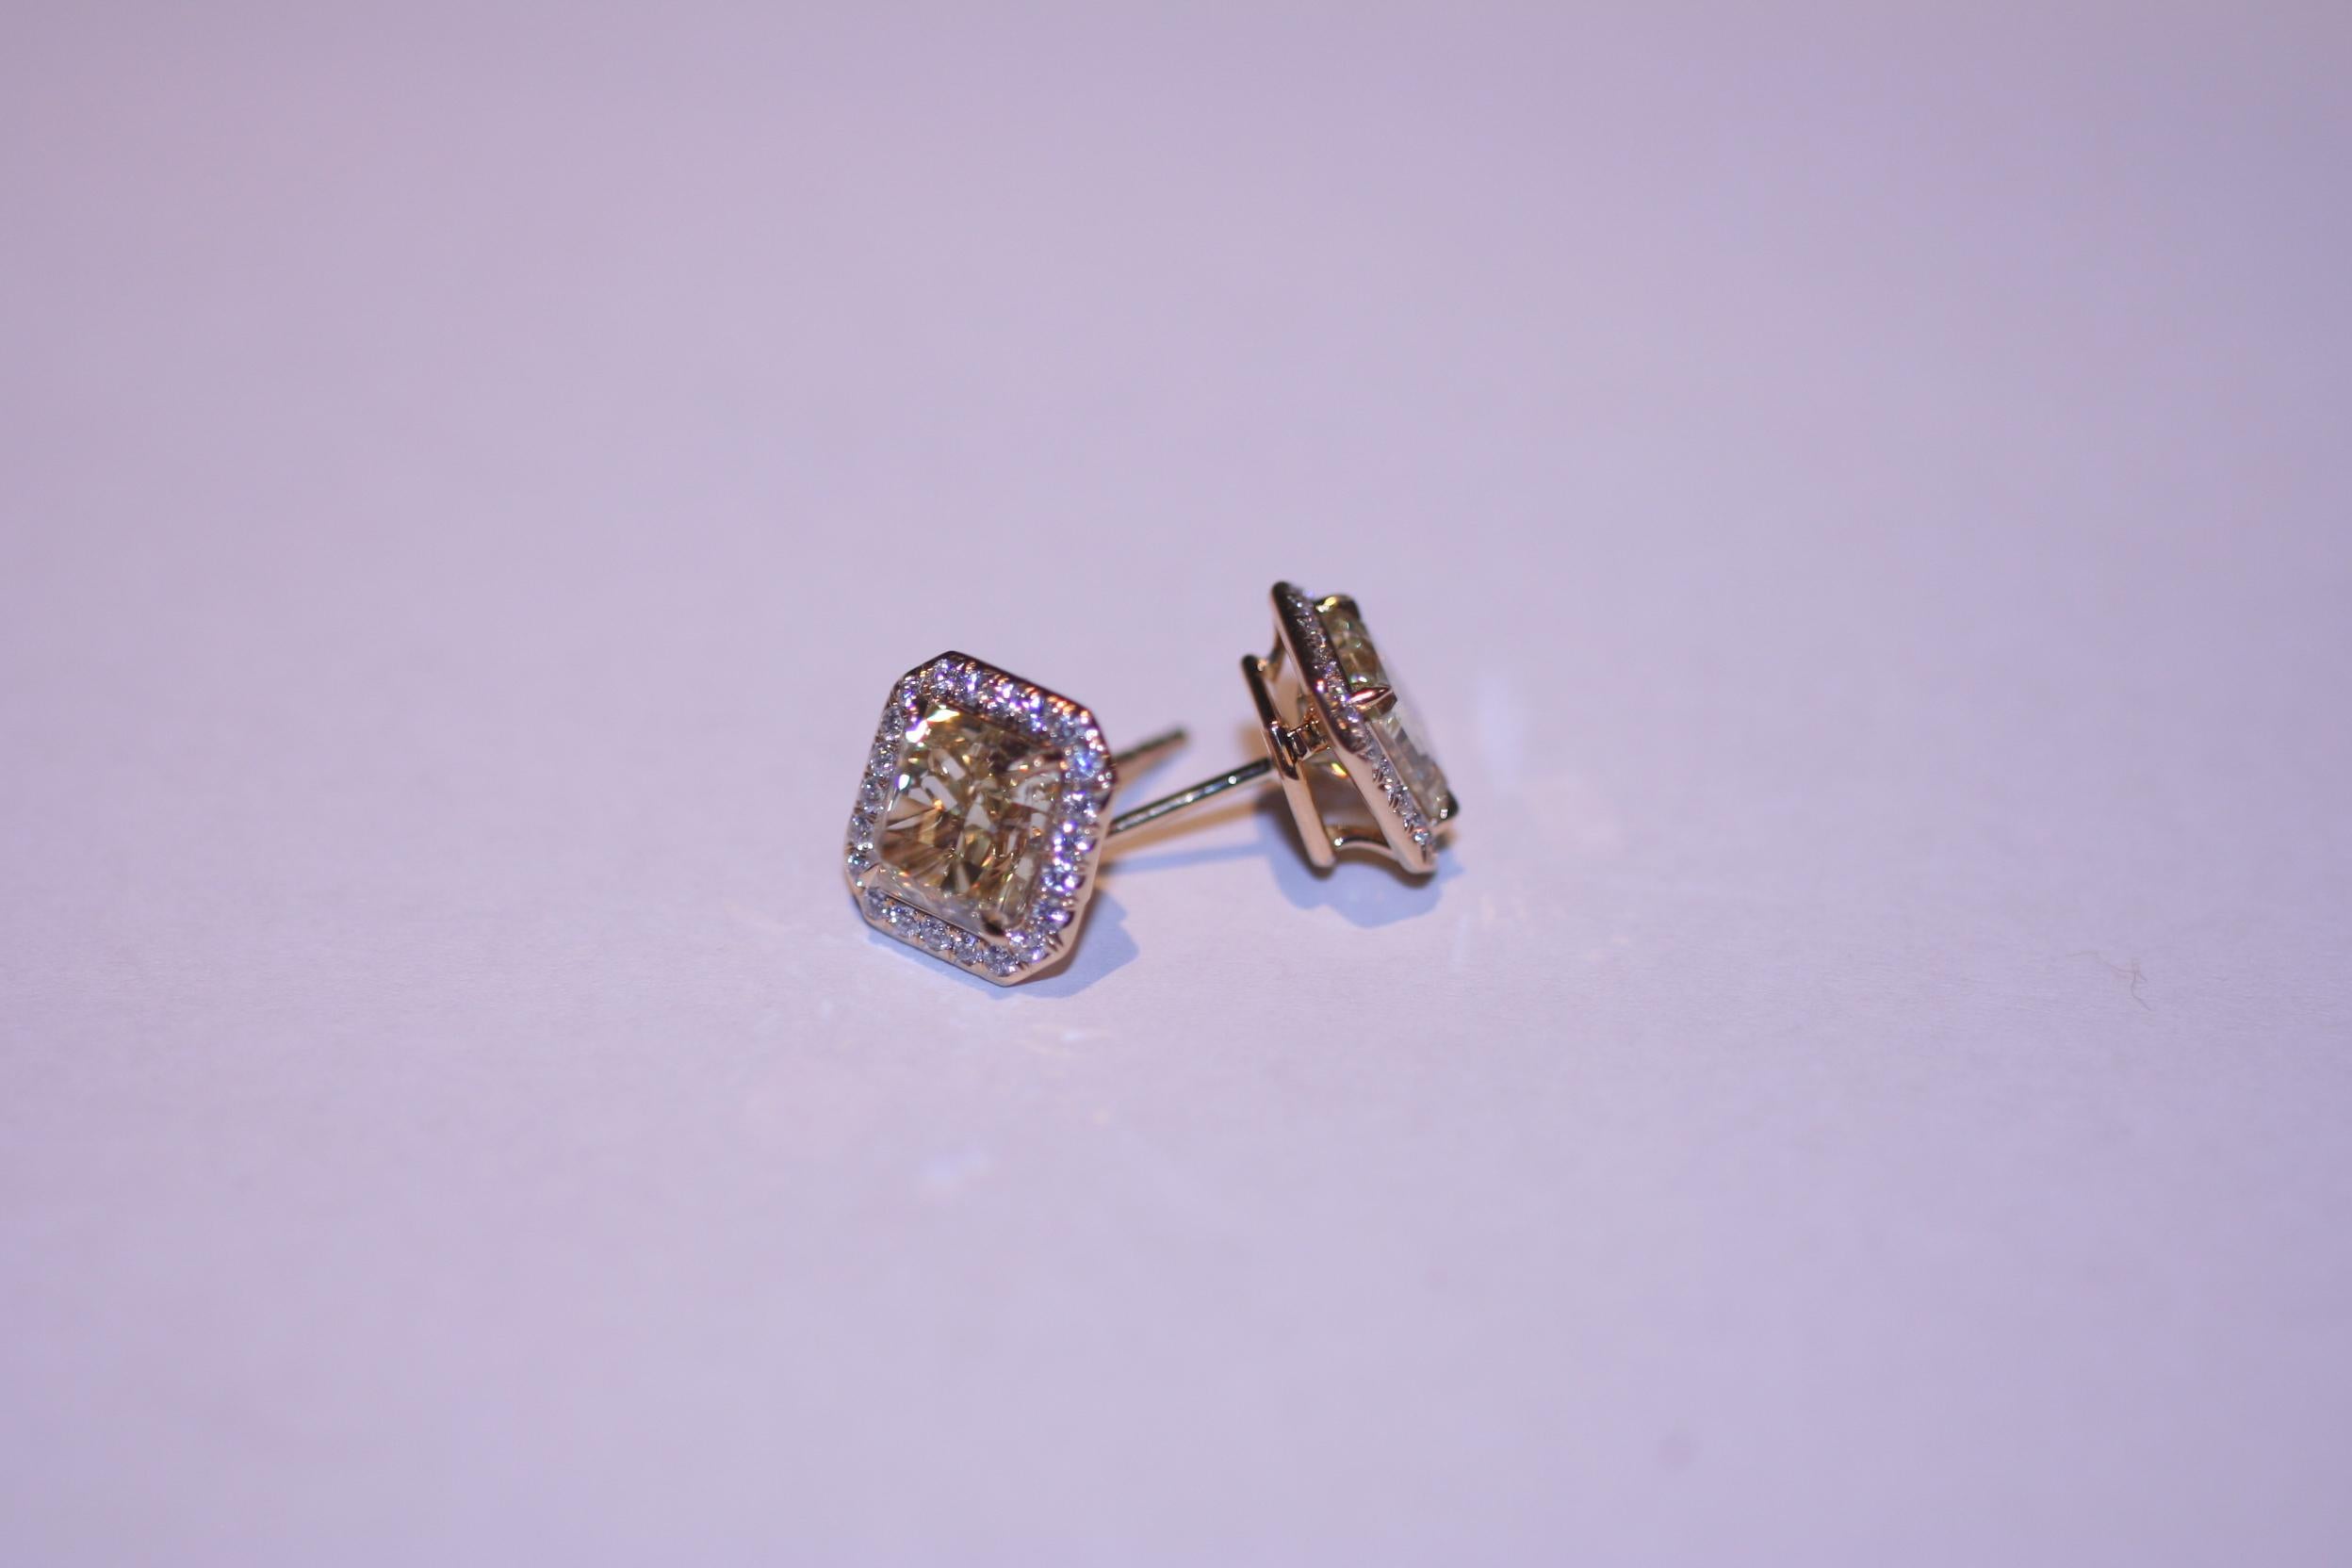 Stunning Handmade 18K Yellow Gold Diamond Earrings with 54 Round Brilliant cut diamonds D-E-F color VS clarity weighting appx. 0.39 carat, accompanied by center diamonds:

RAD 2.18ct Fancy Yellow VVS2 GIA certificate no. 2215147504
RAD 2.20ct Fancy